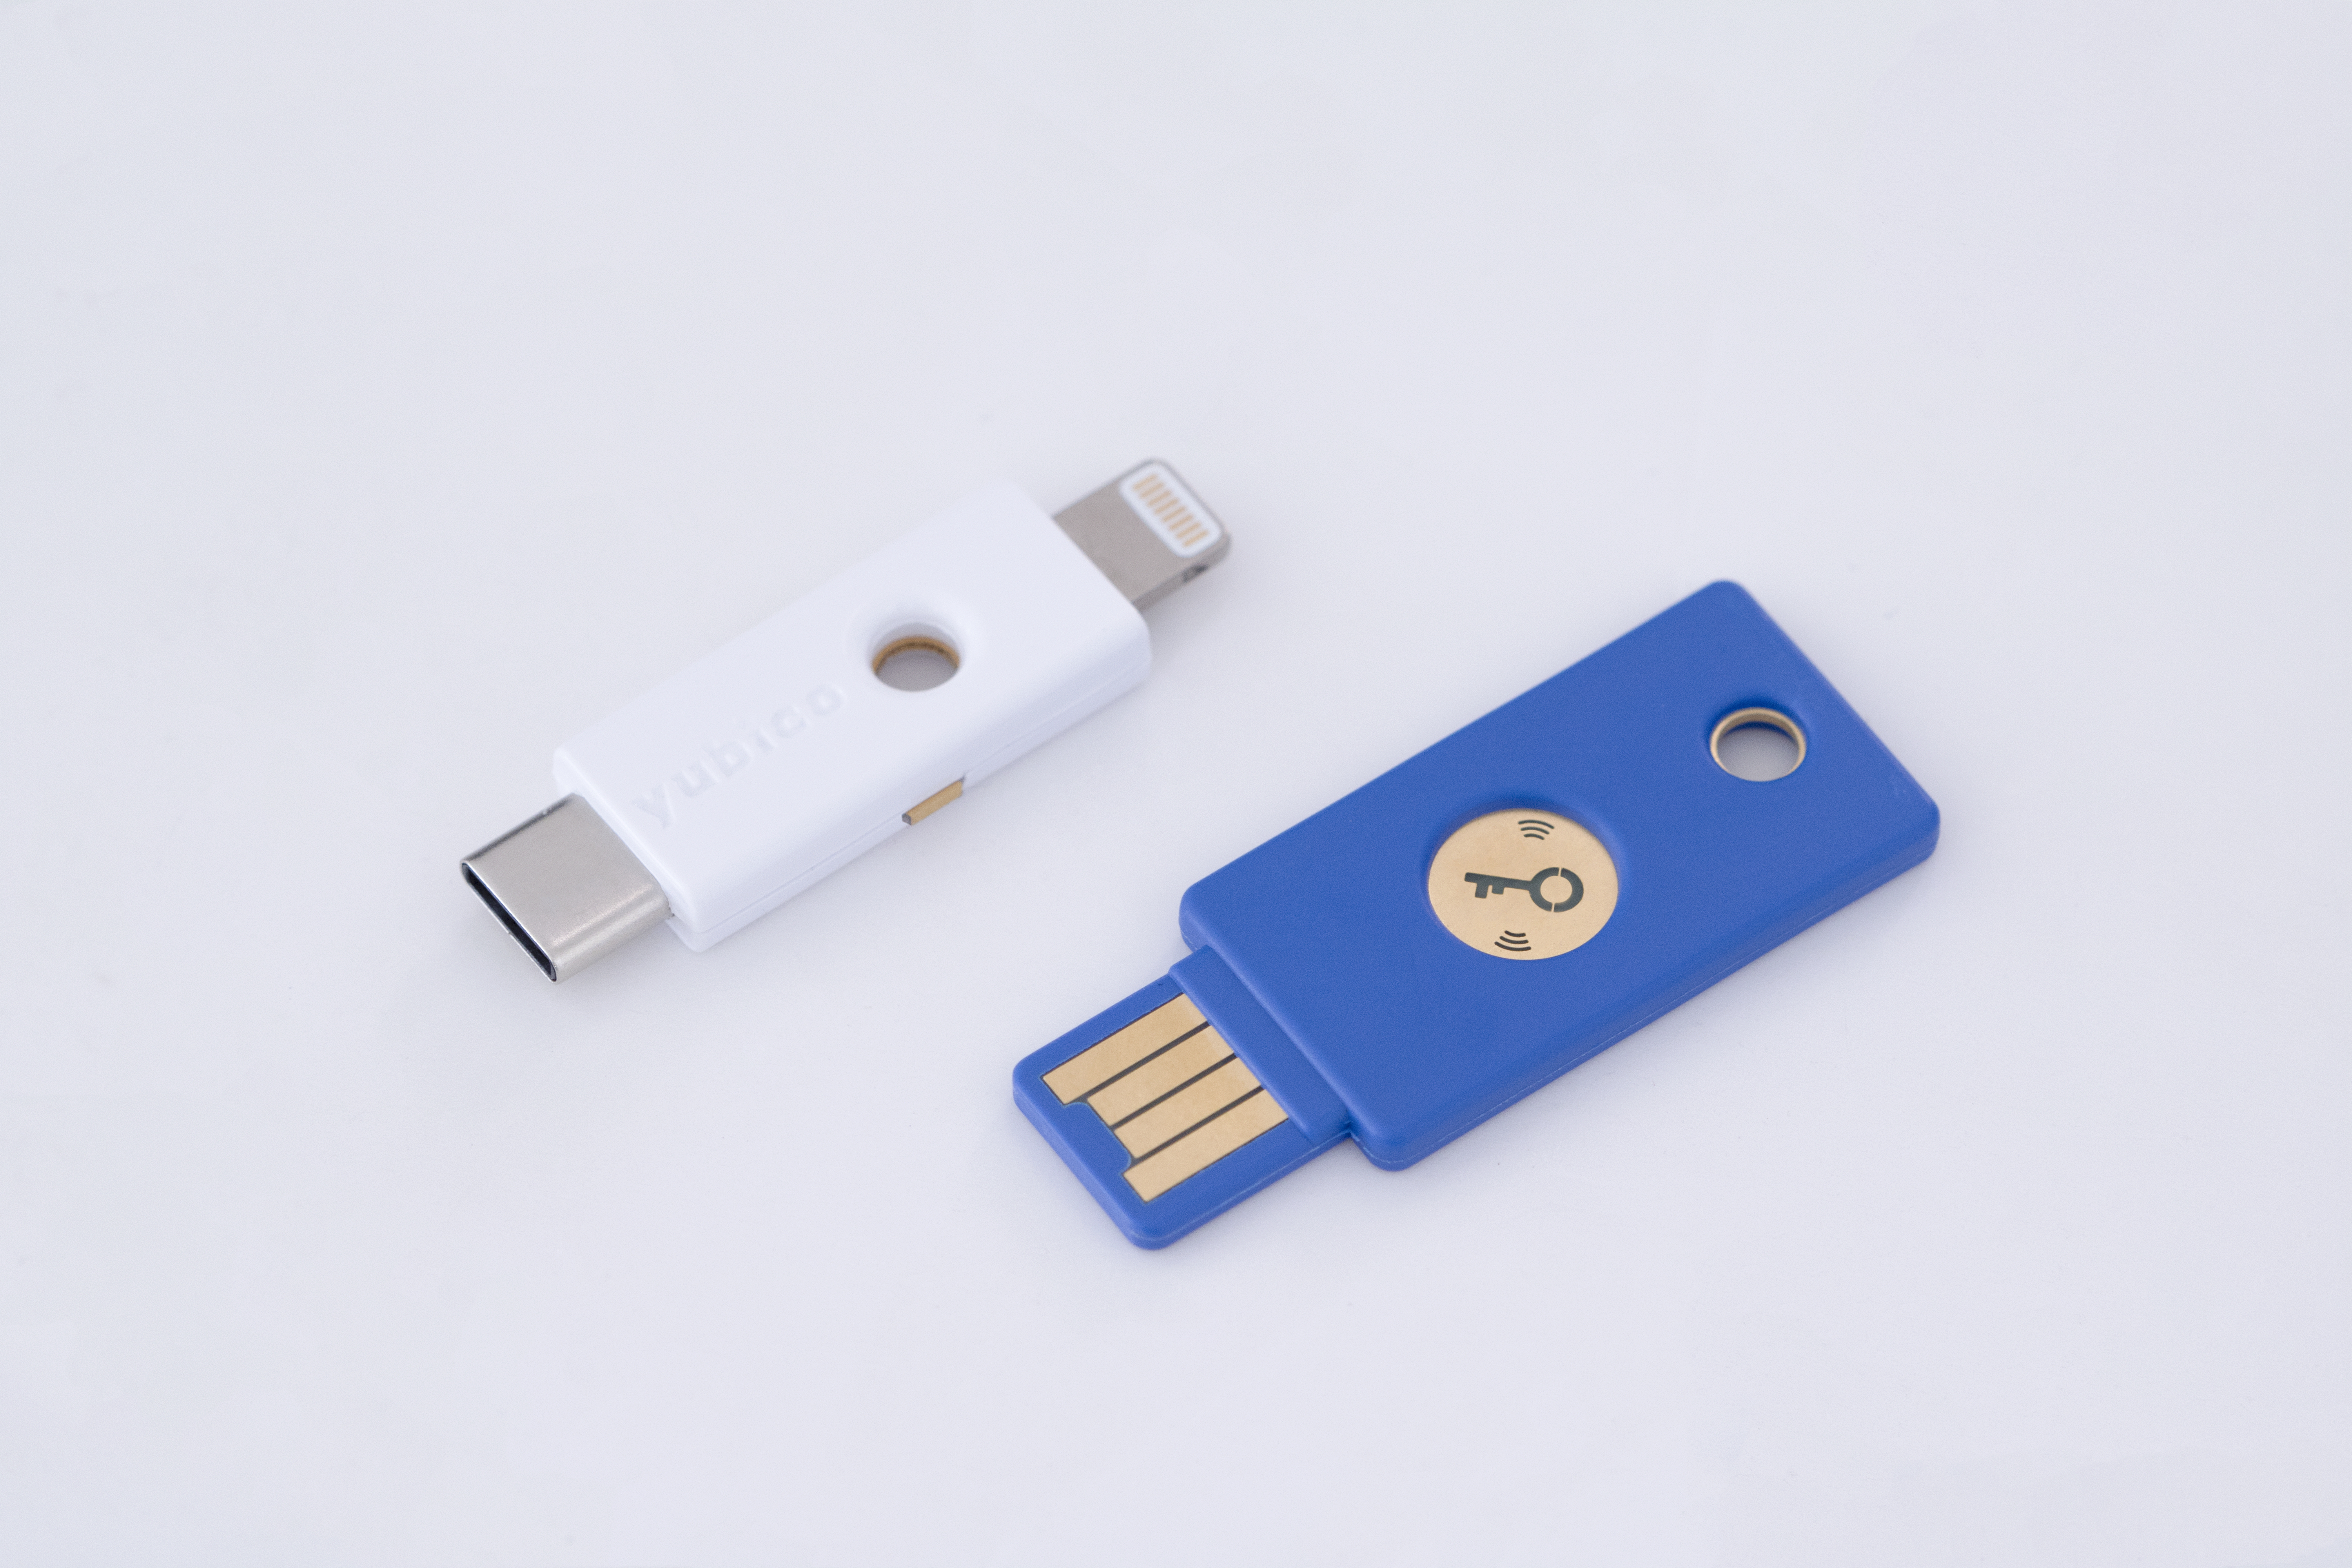 YubiKey 5 NFC Yubico Two Factor Authentication USB and NFC Security Key,